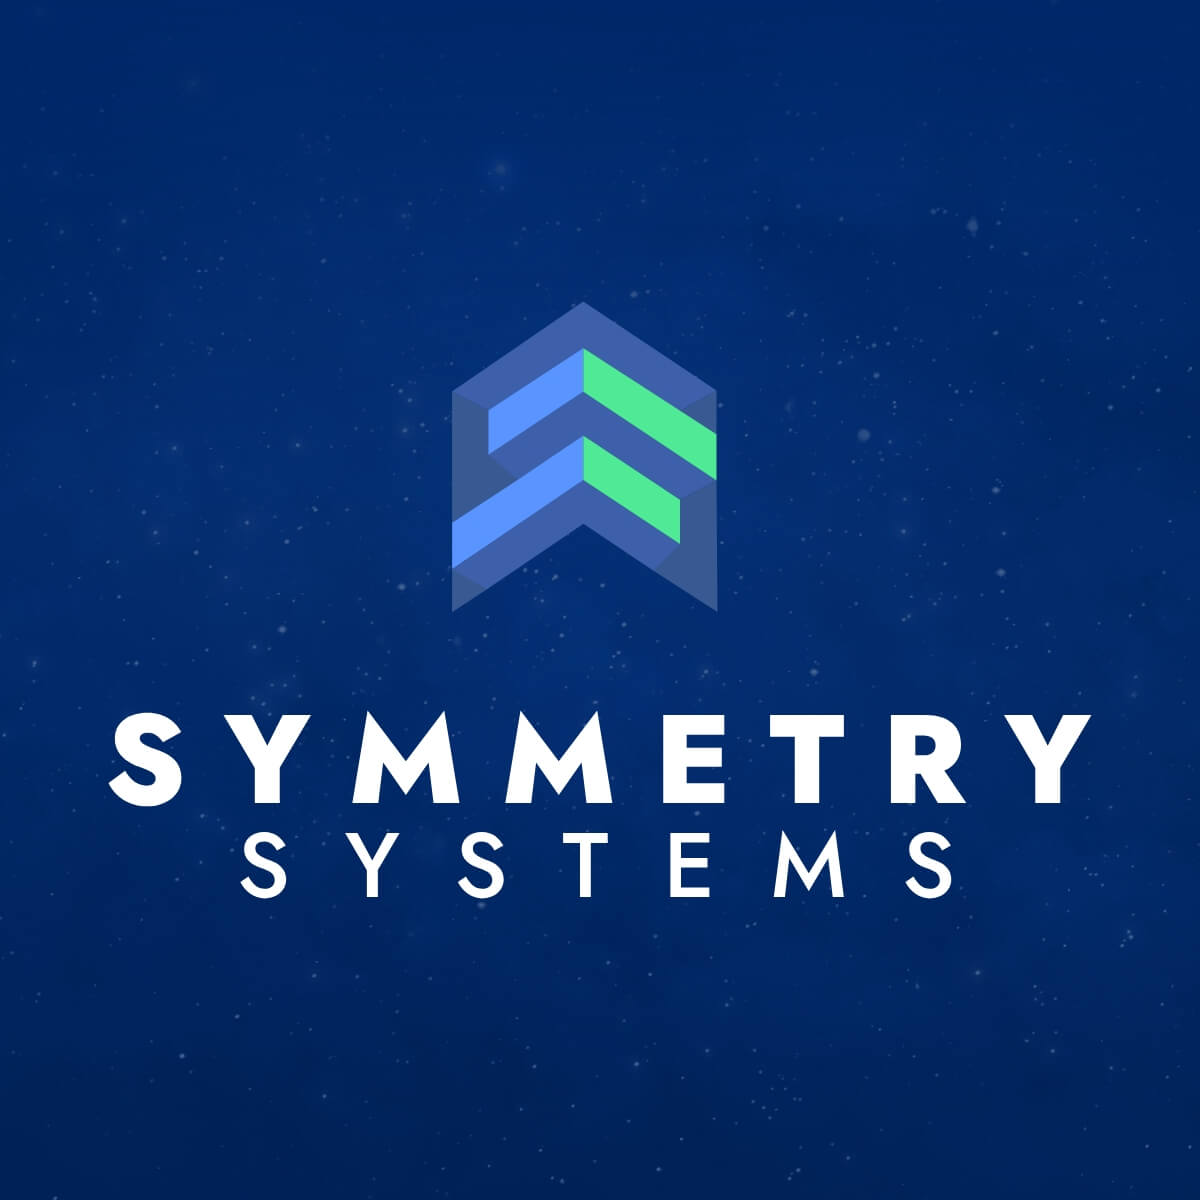 symmetry-systems-ramps-up-hybrid-cloud-data-security-with-15-million-series-a-funding